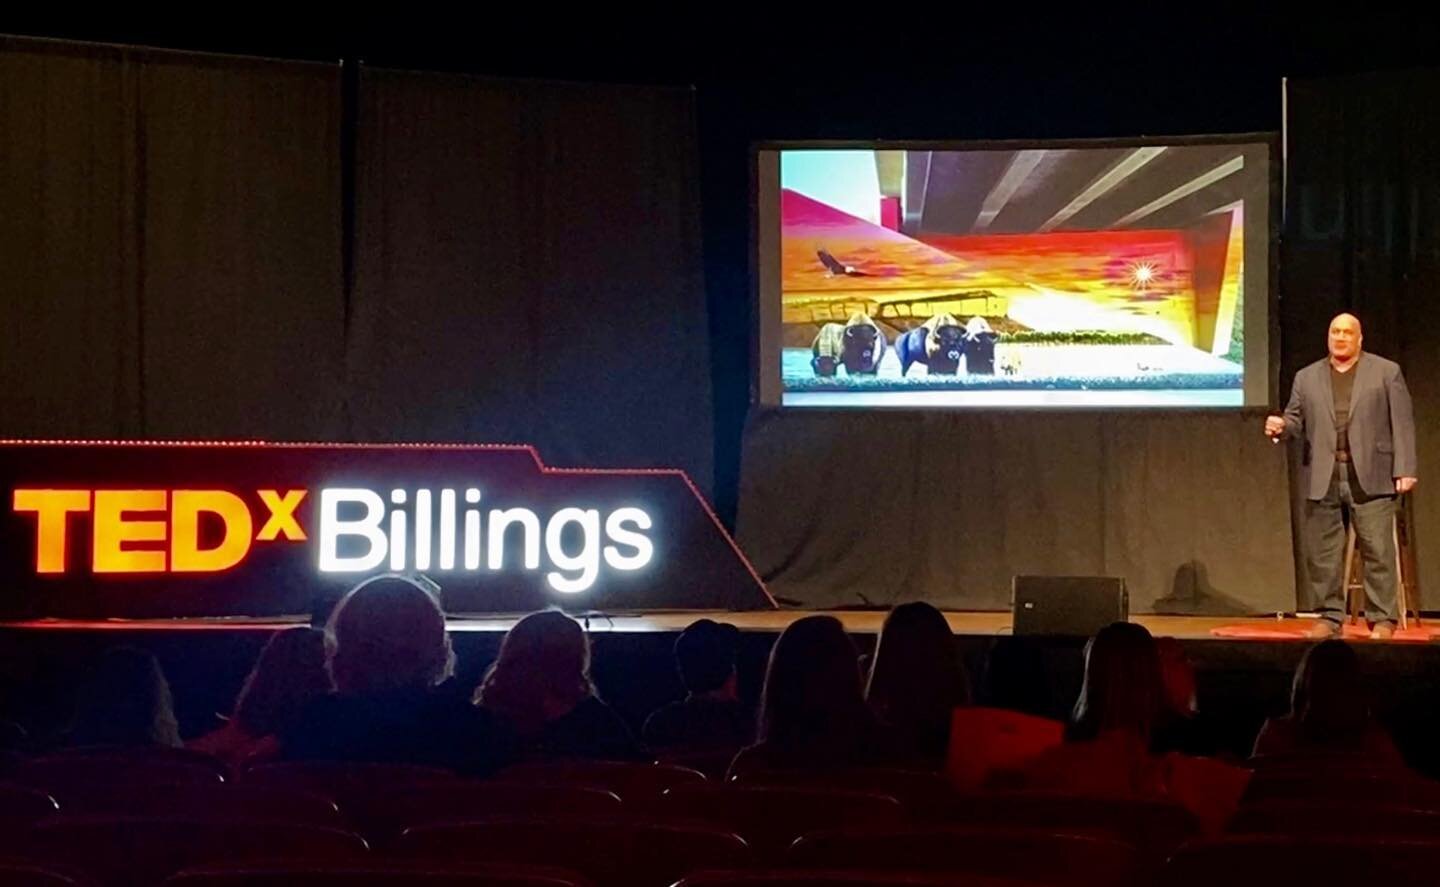 I have spent countless hours watching TED Talks on YouTube, so it is so surreal to me that I have now been included in a TED Talk! Congratulations to @welhavenleif on being selected to present at the prestigious @tedxbillings event this weekend! Leif